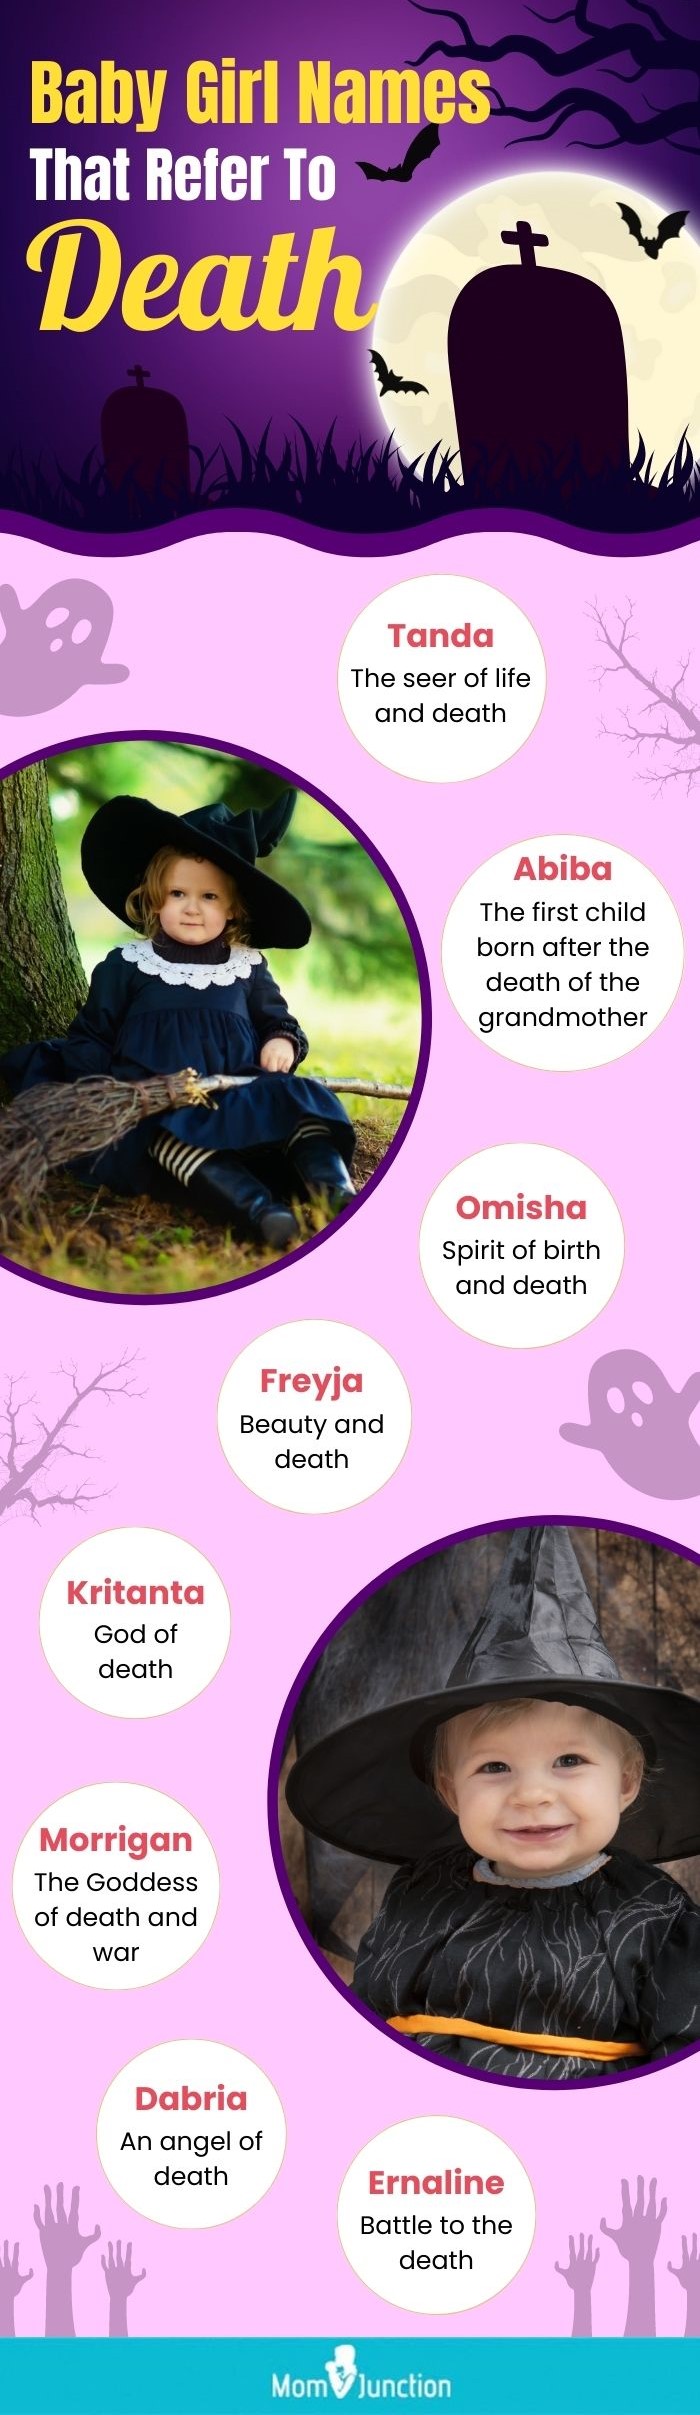 mysterious baby girl names that mean death (infographic)